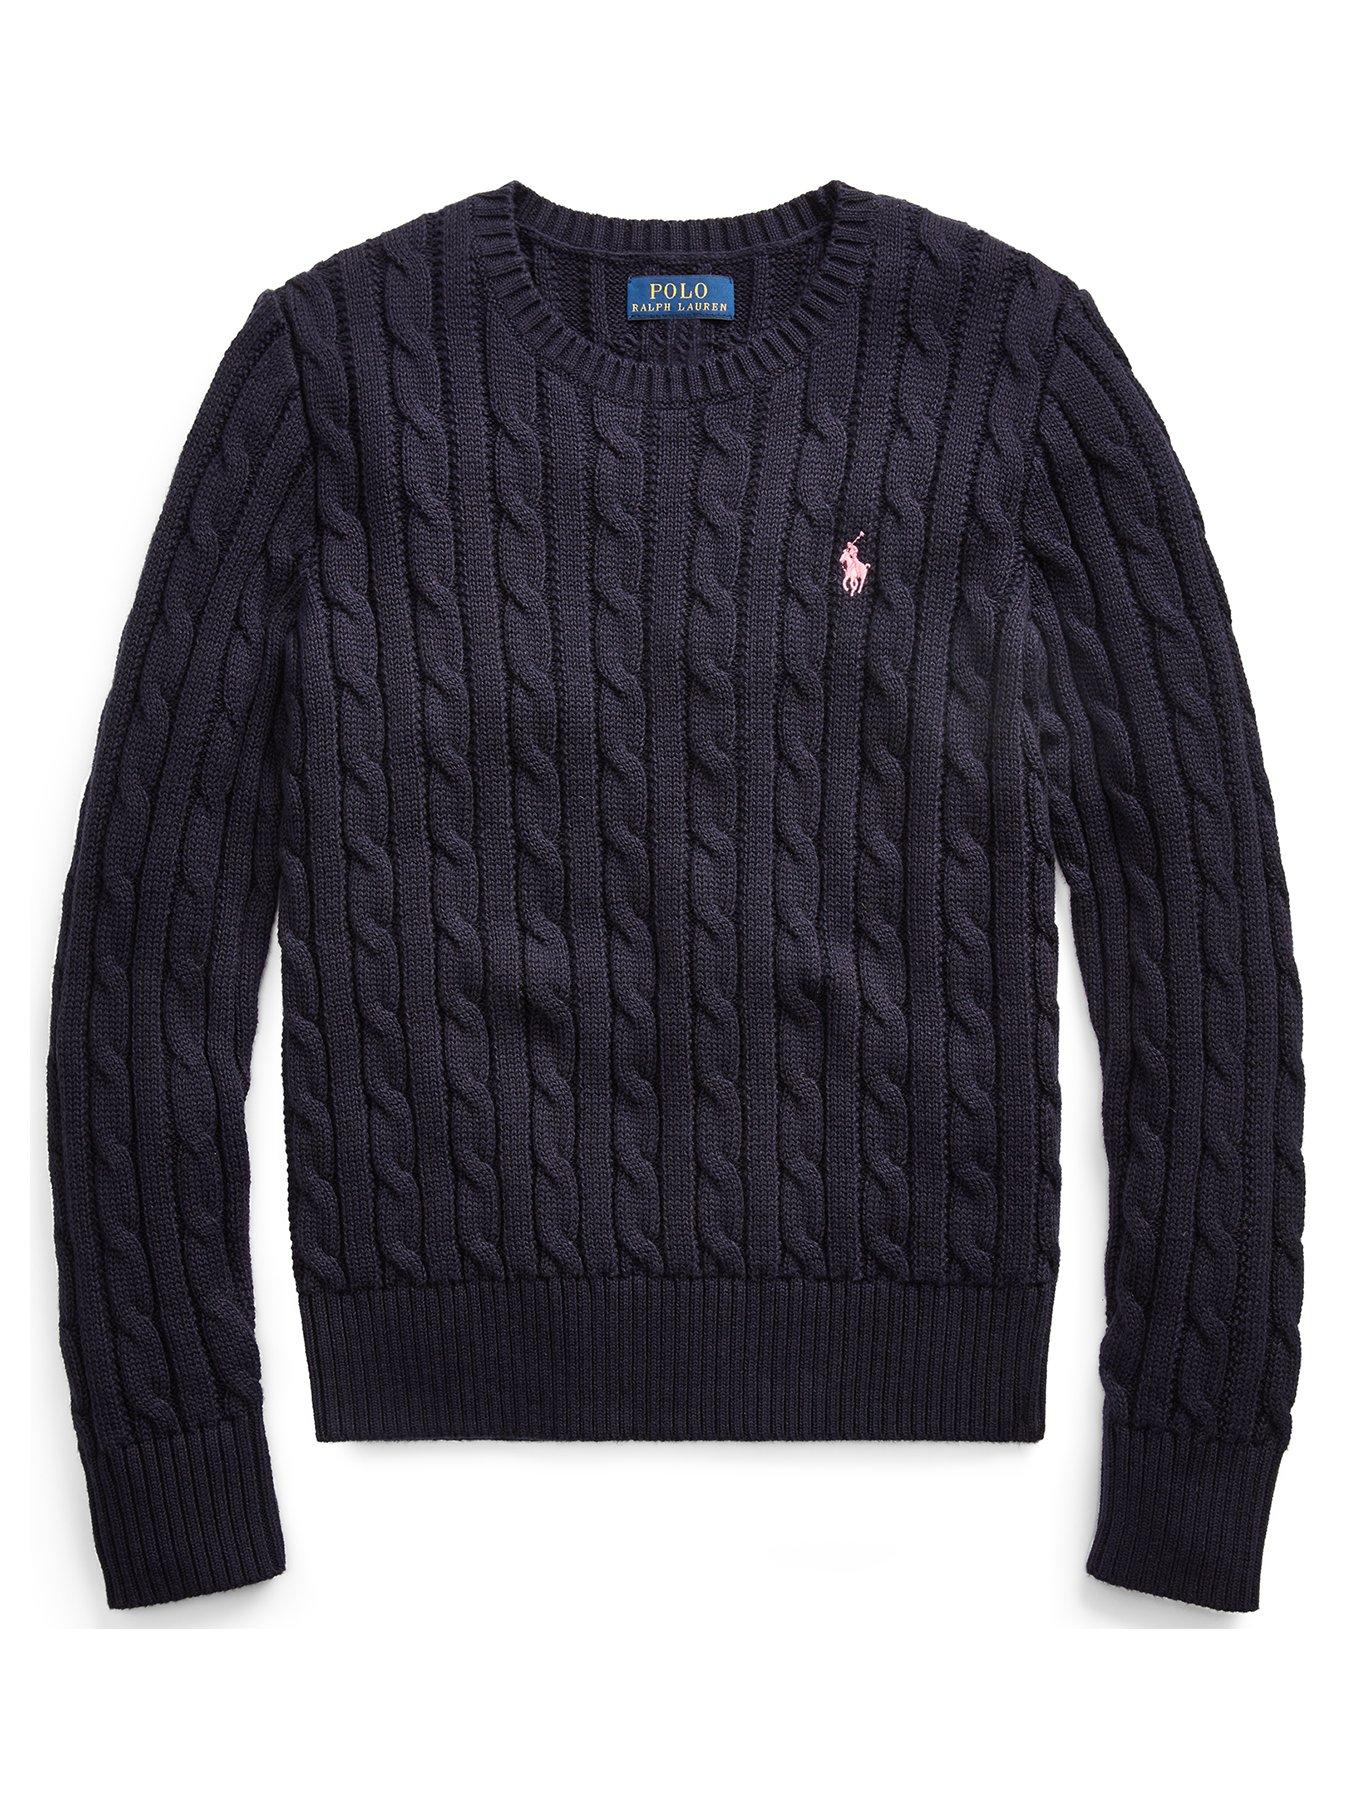 Ralph Lauren Girls Classic Cable Knit Jumper - Navy | very.co.uk